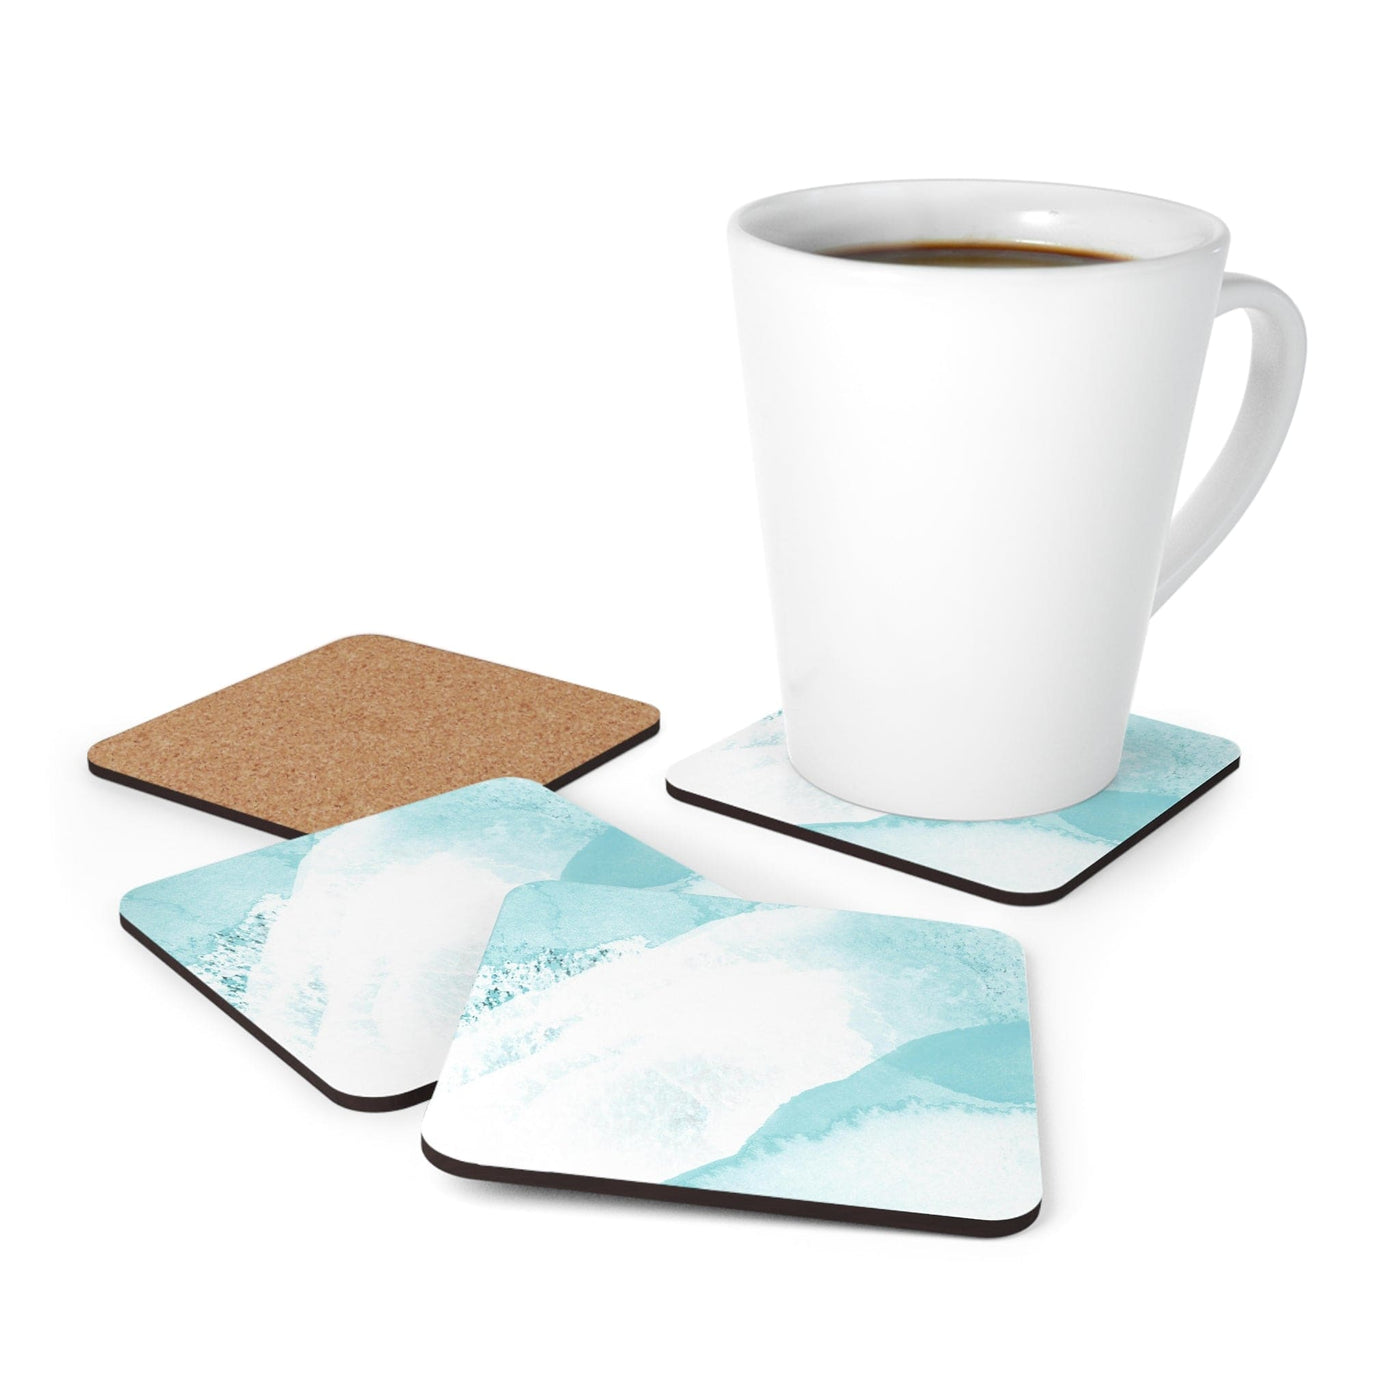 Handcrafted Square Coaster Set Of 4 For Drinks And Cups Subtle Abstract Ocean